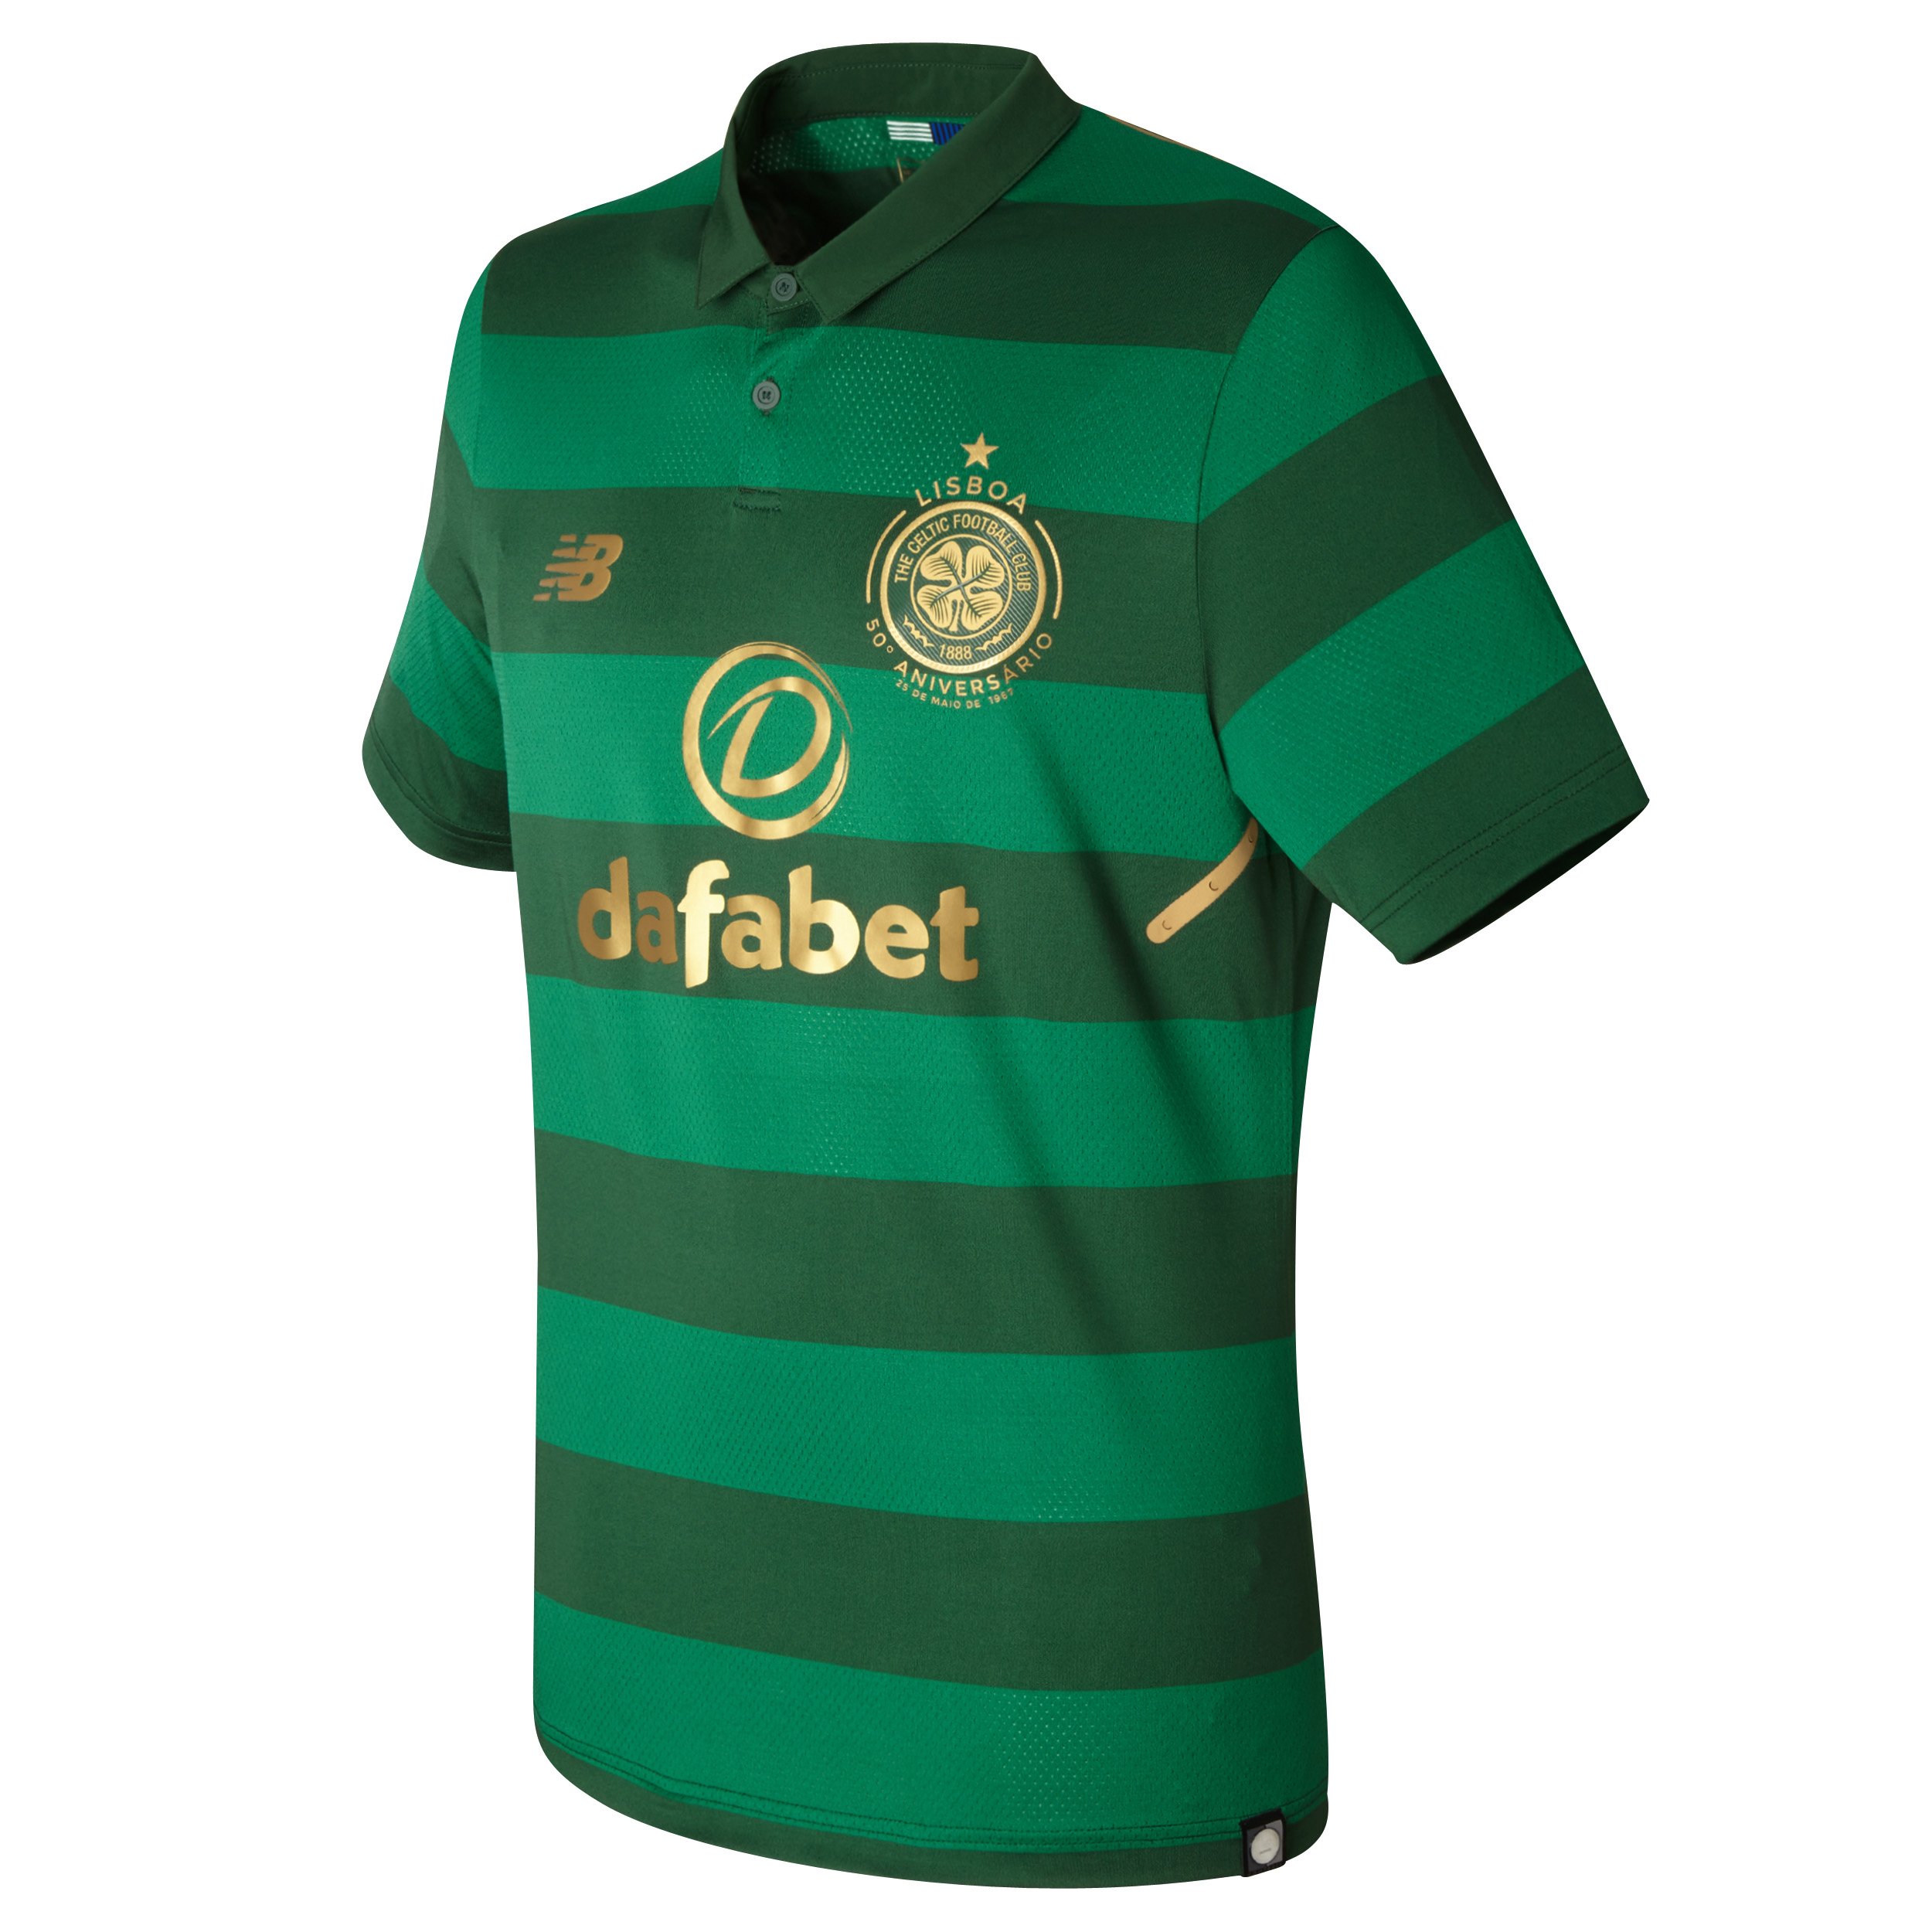 The new Celtic 2017/18 Third Kit - pre-order today